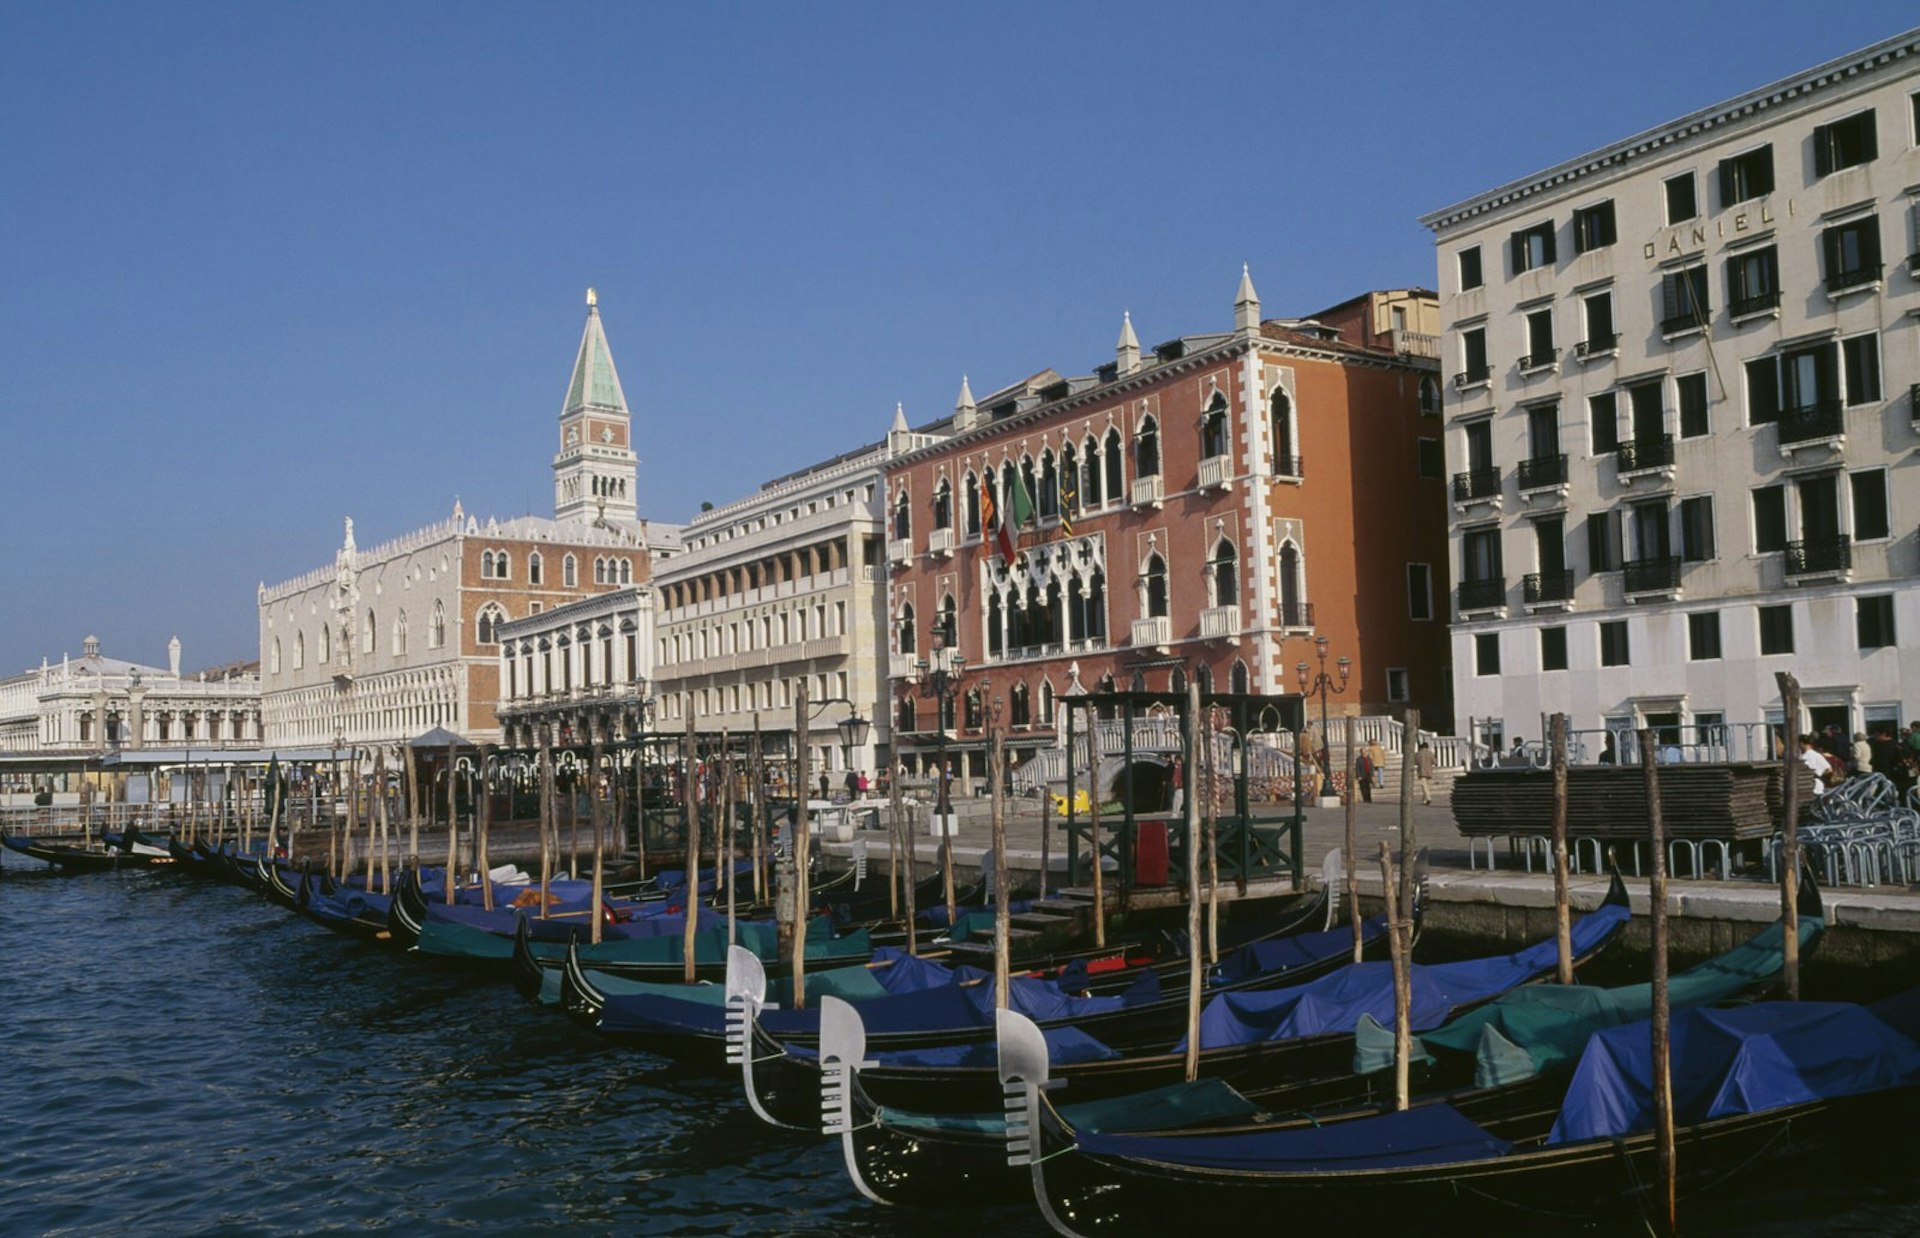 Terazza Danieli (far right) has spectacular views of the Doge's Palace and the lagoon